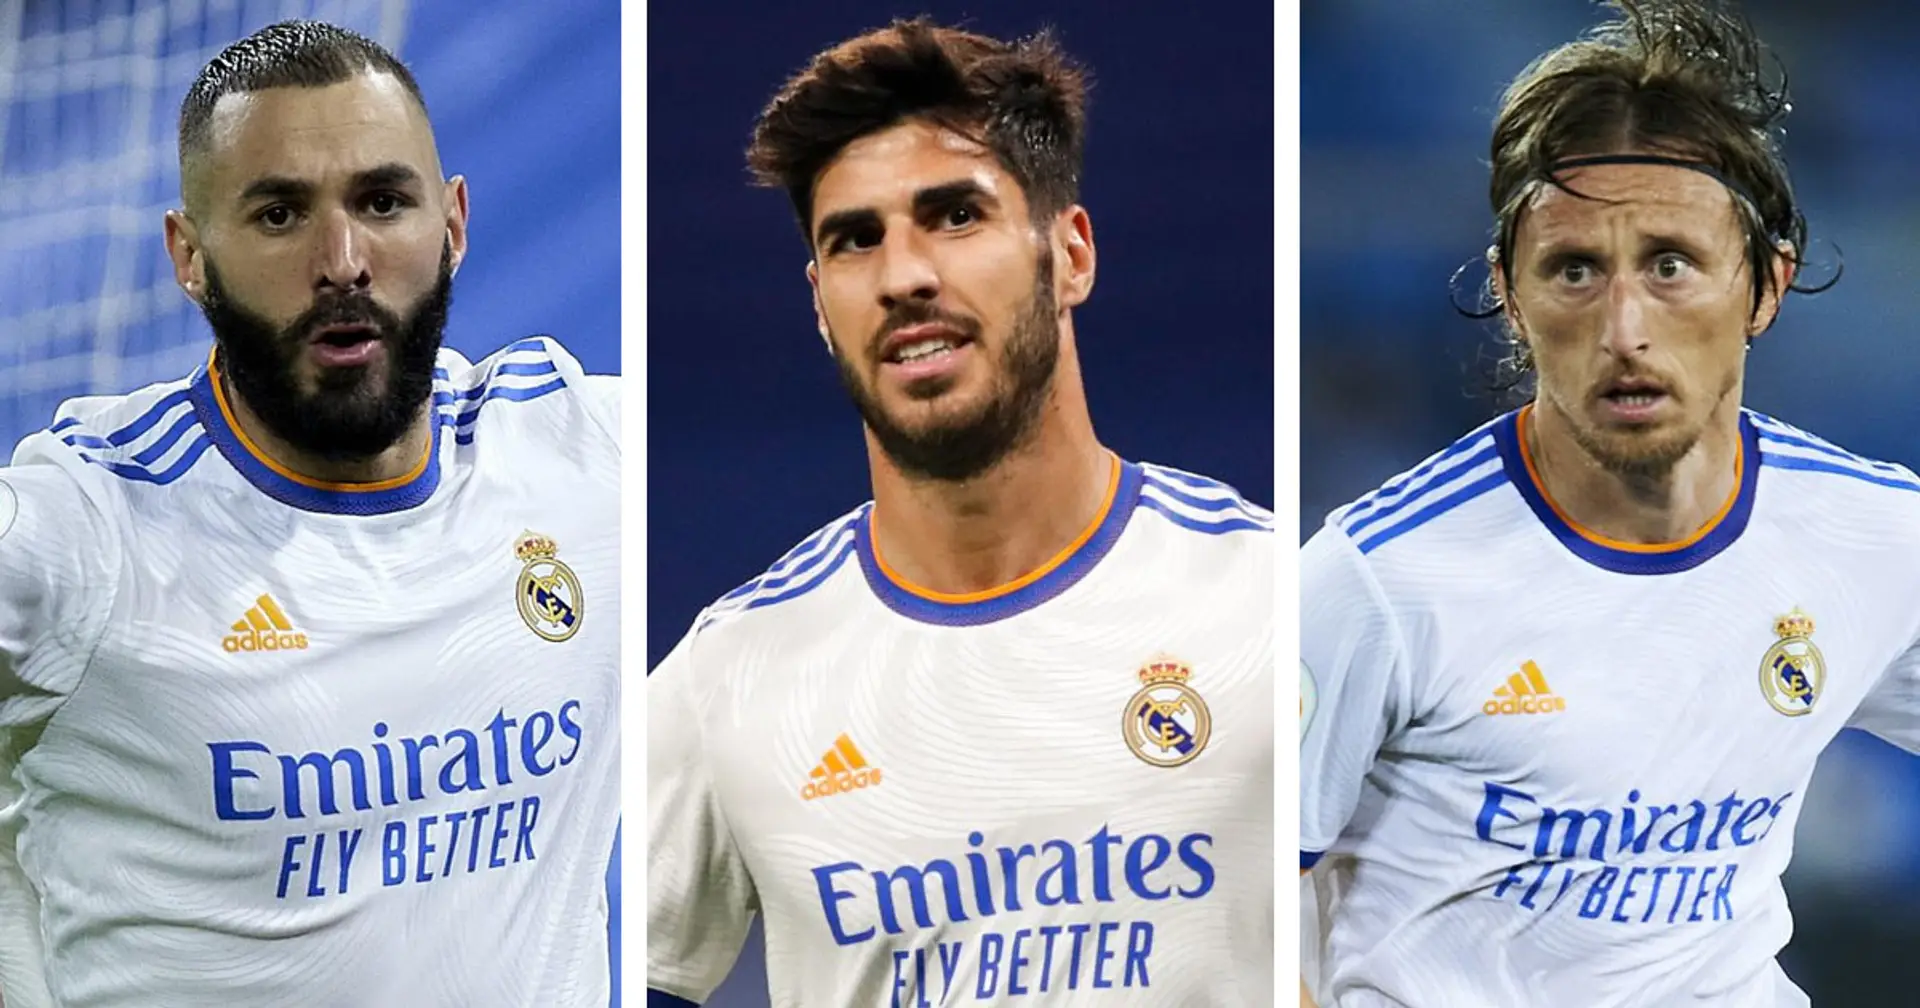 Ancelotti comments on Asensio performance & 3 more big stories you might've missed